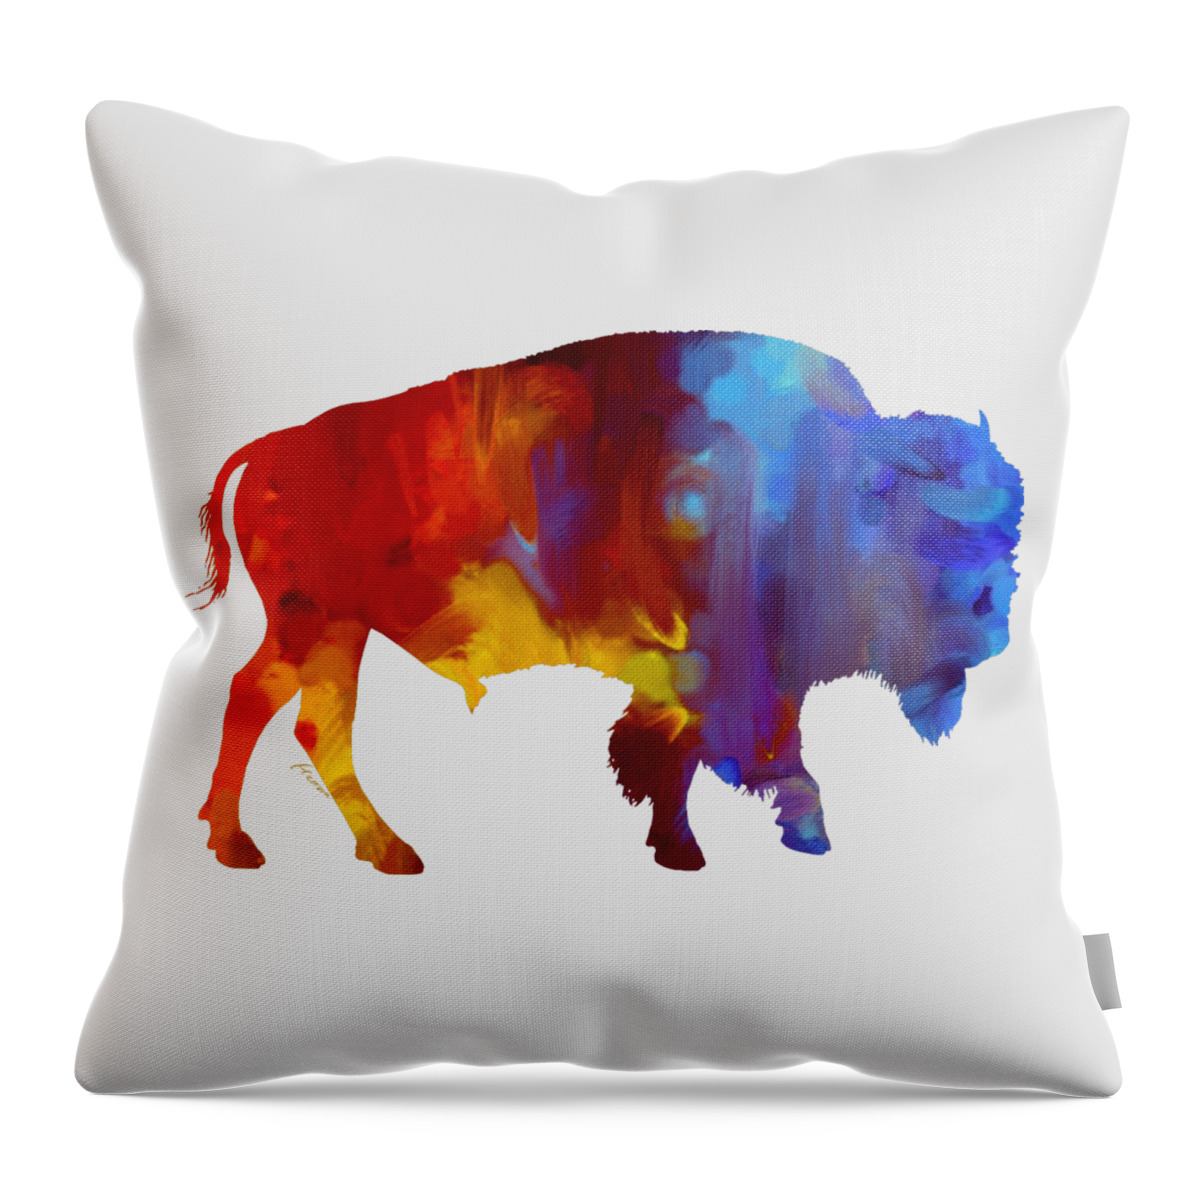 Buffalo Throw Pillow featuring the painting Colorful Buffalo by Hailey E Herrera